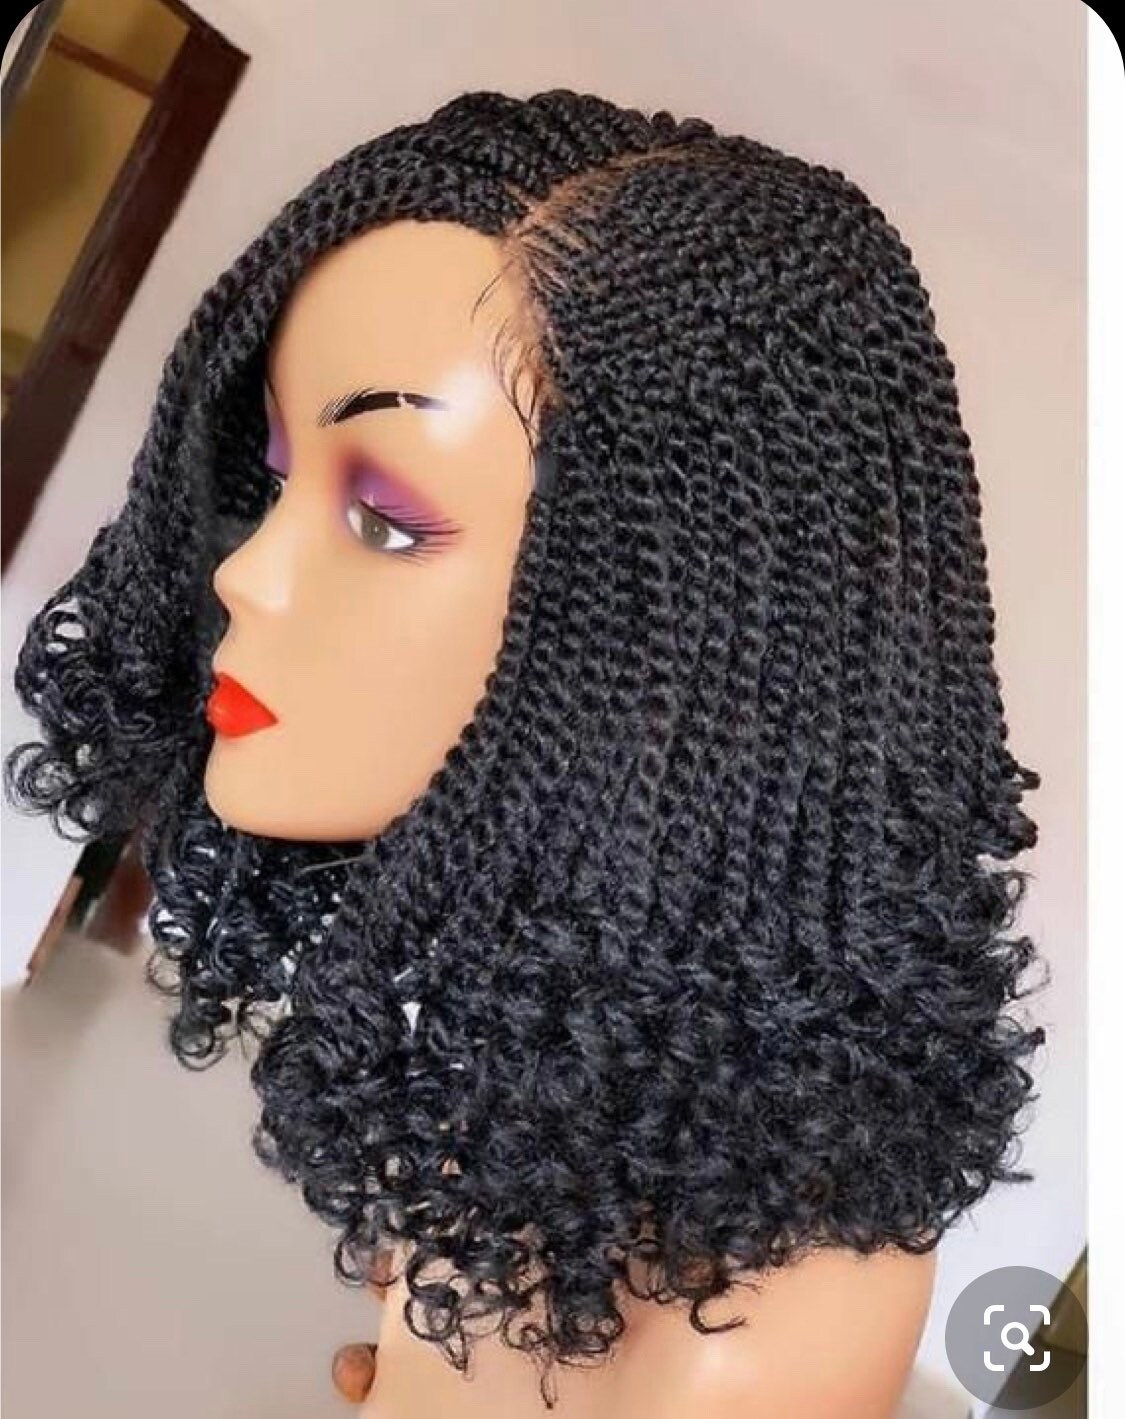 Short Kinky Twist Braided Wig MADE-TO-ORDER | Etsy